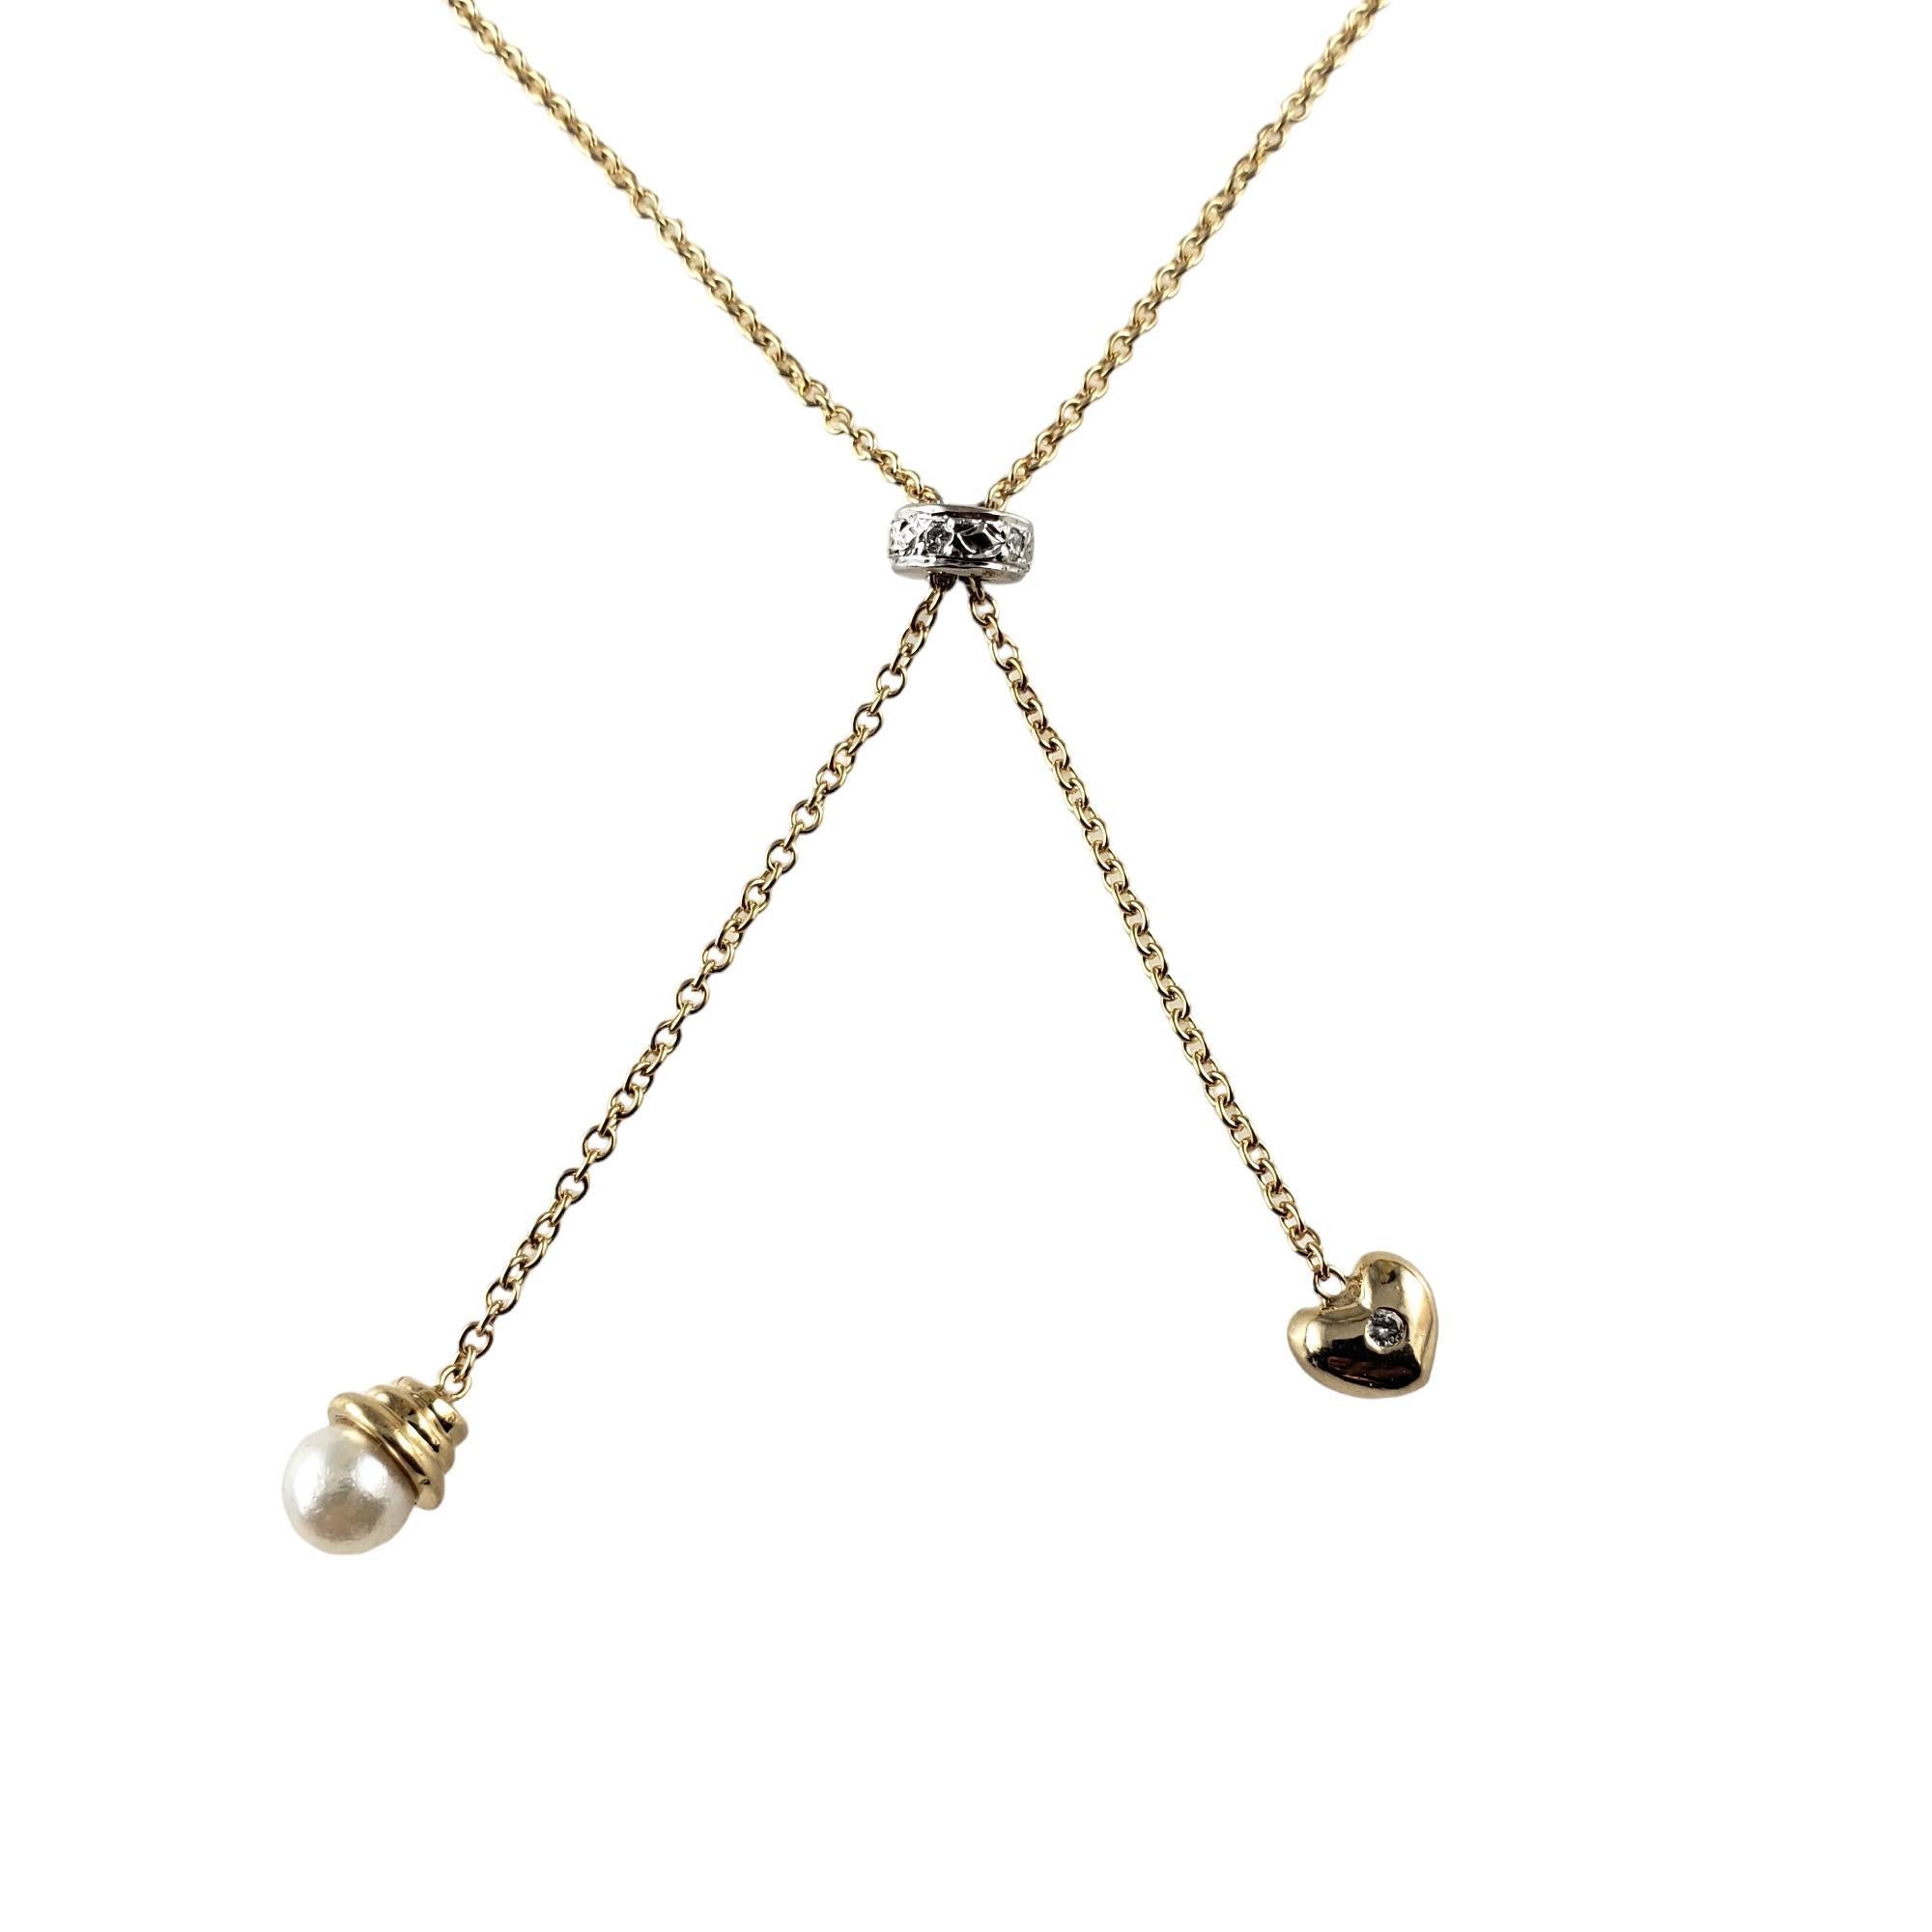 Vintage 14 Karat Yellow Gold, Diamond and Pearl Necklace-

This stunning fixed lariat style necklace features seven round brilliant cut diamonds with dangling pearl and heart crafted in beautifully detailed 14K yellow gold.  

Approximate total